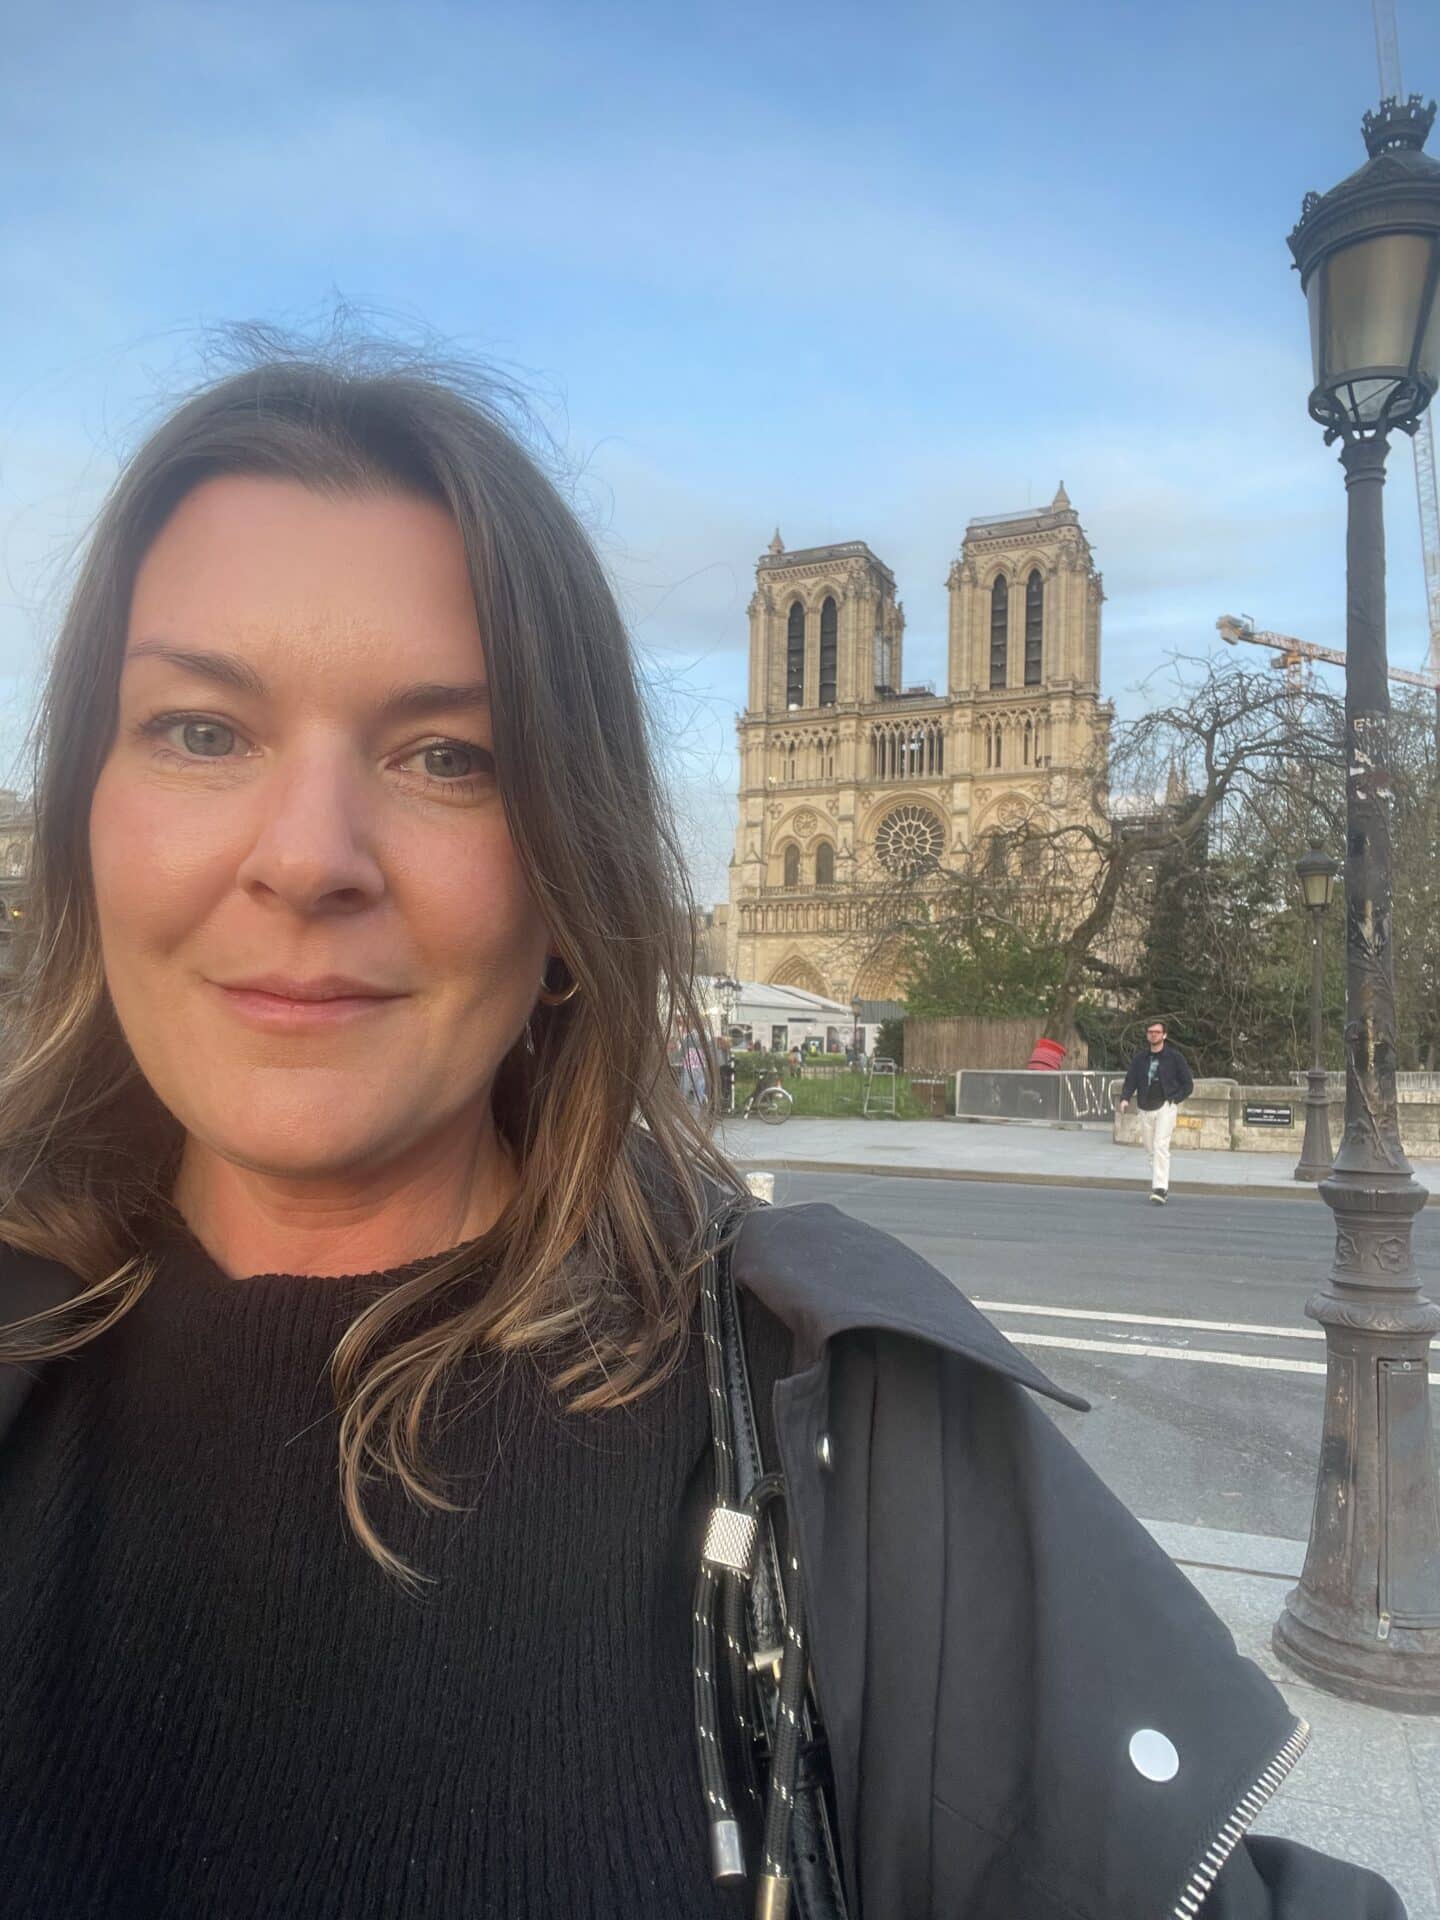 A close-up selfie of a solo female traveler, with the historic Notre Dame Cathedral in the background. Her warm smile and casual style contrast beautifully against the intricate Gothic architecture of the cathedral.